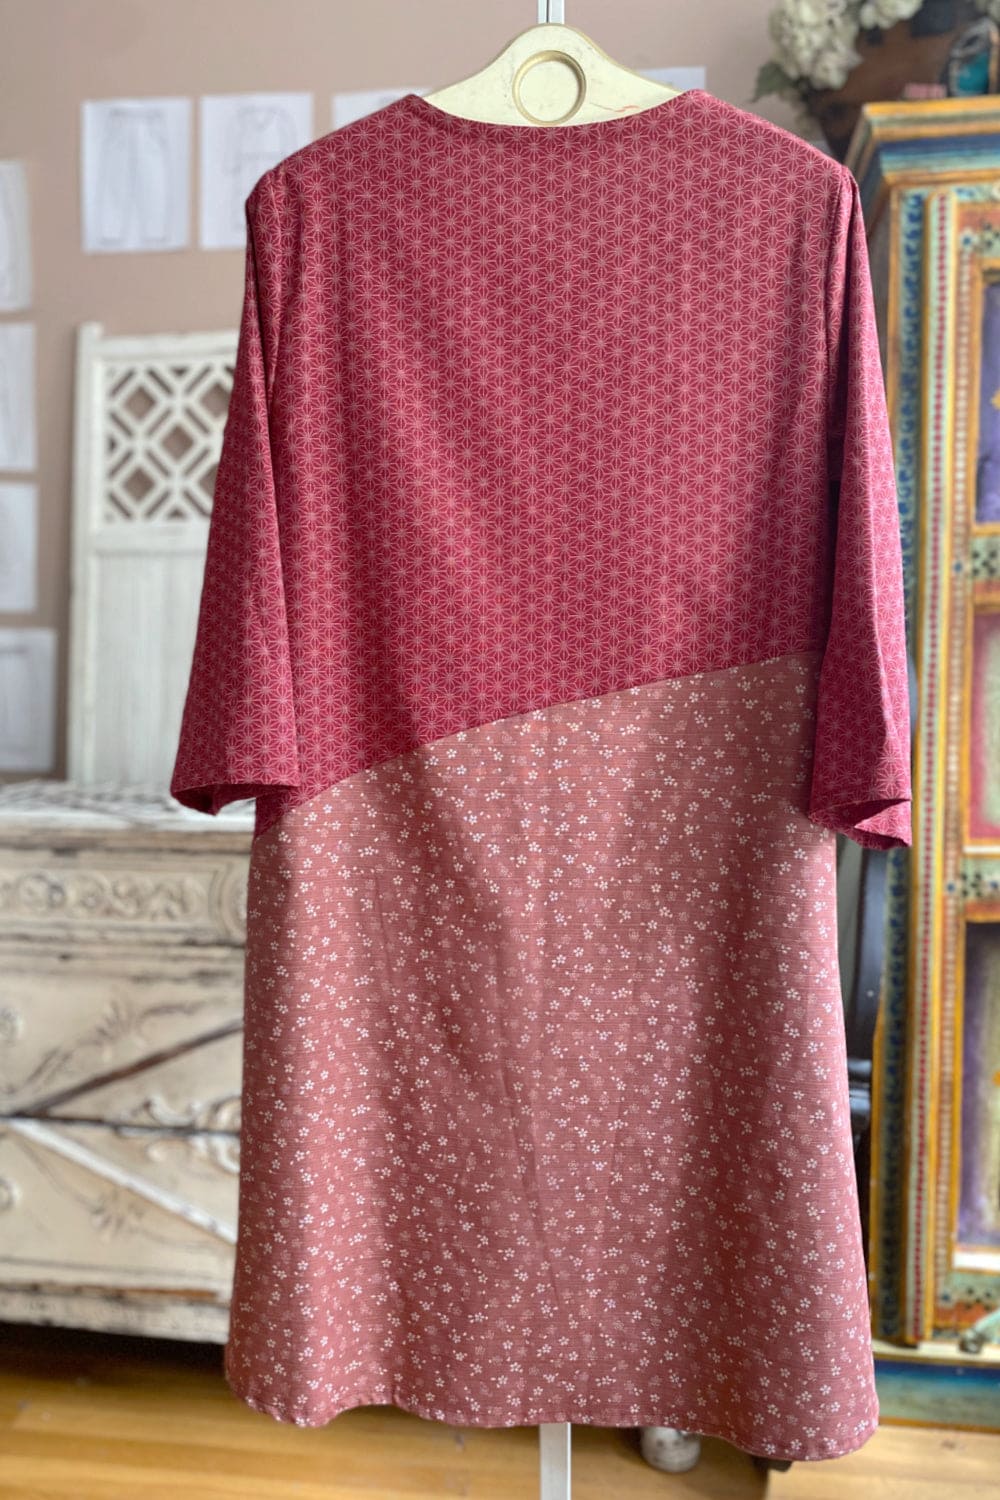 Back view of soft rose colored tunic dress.